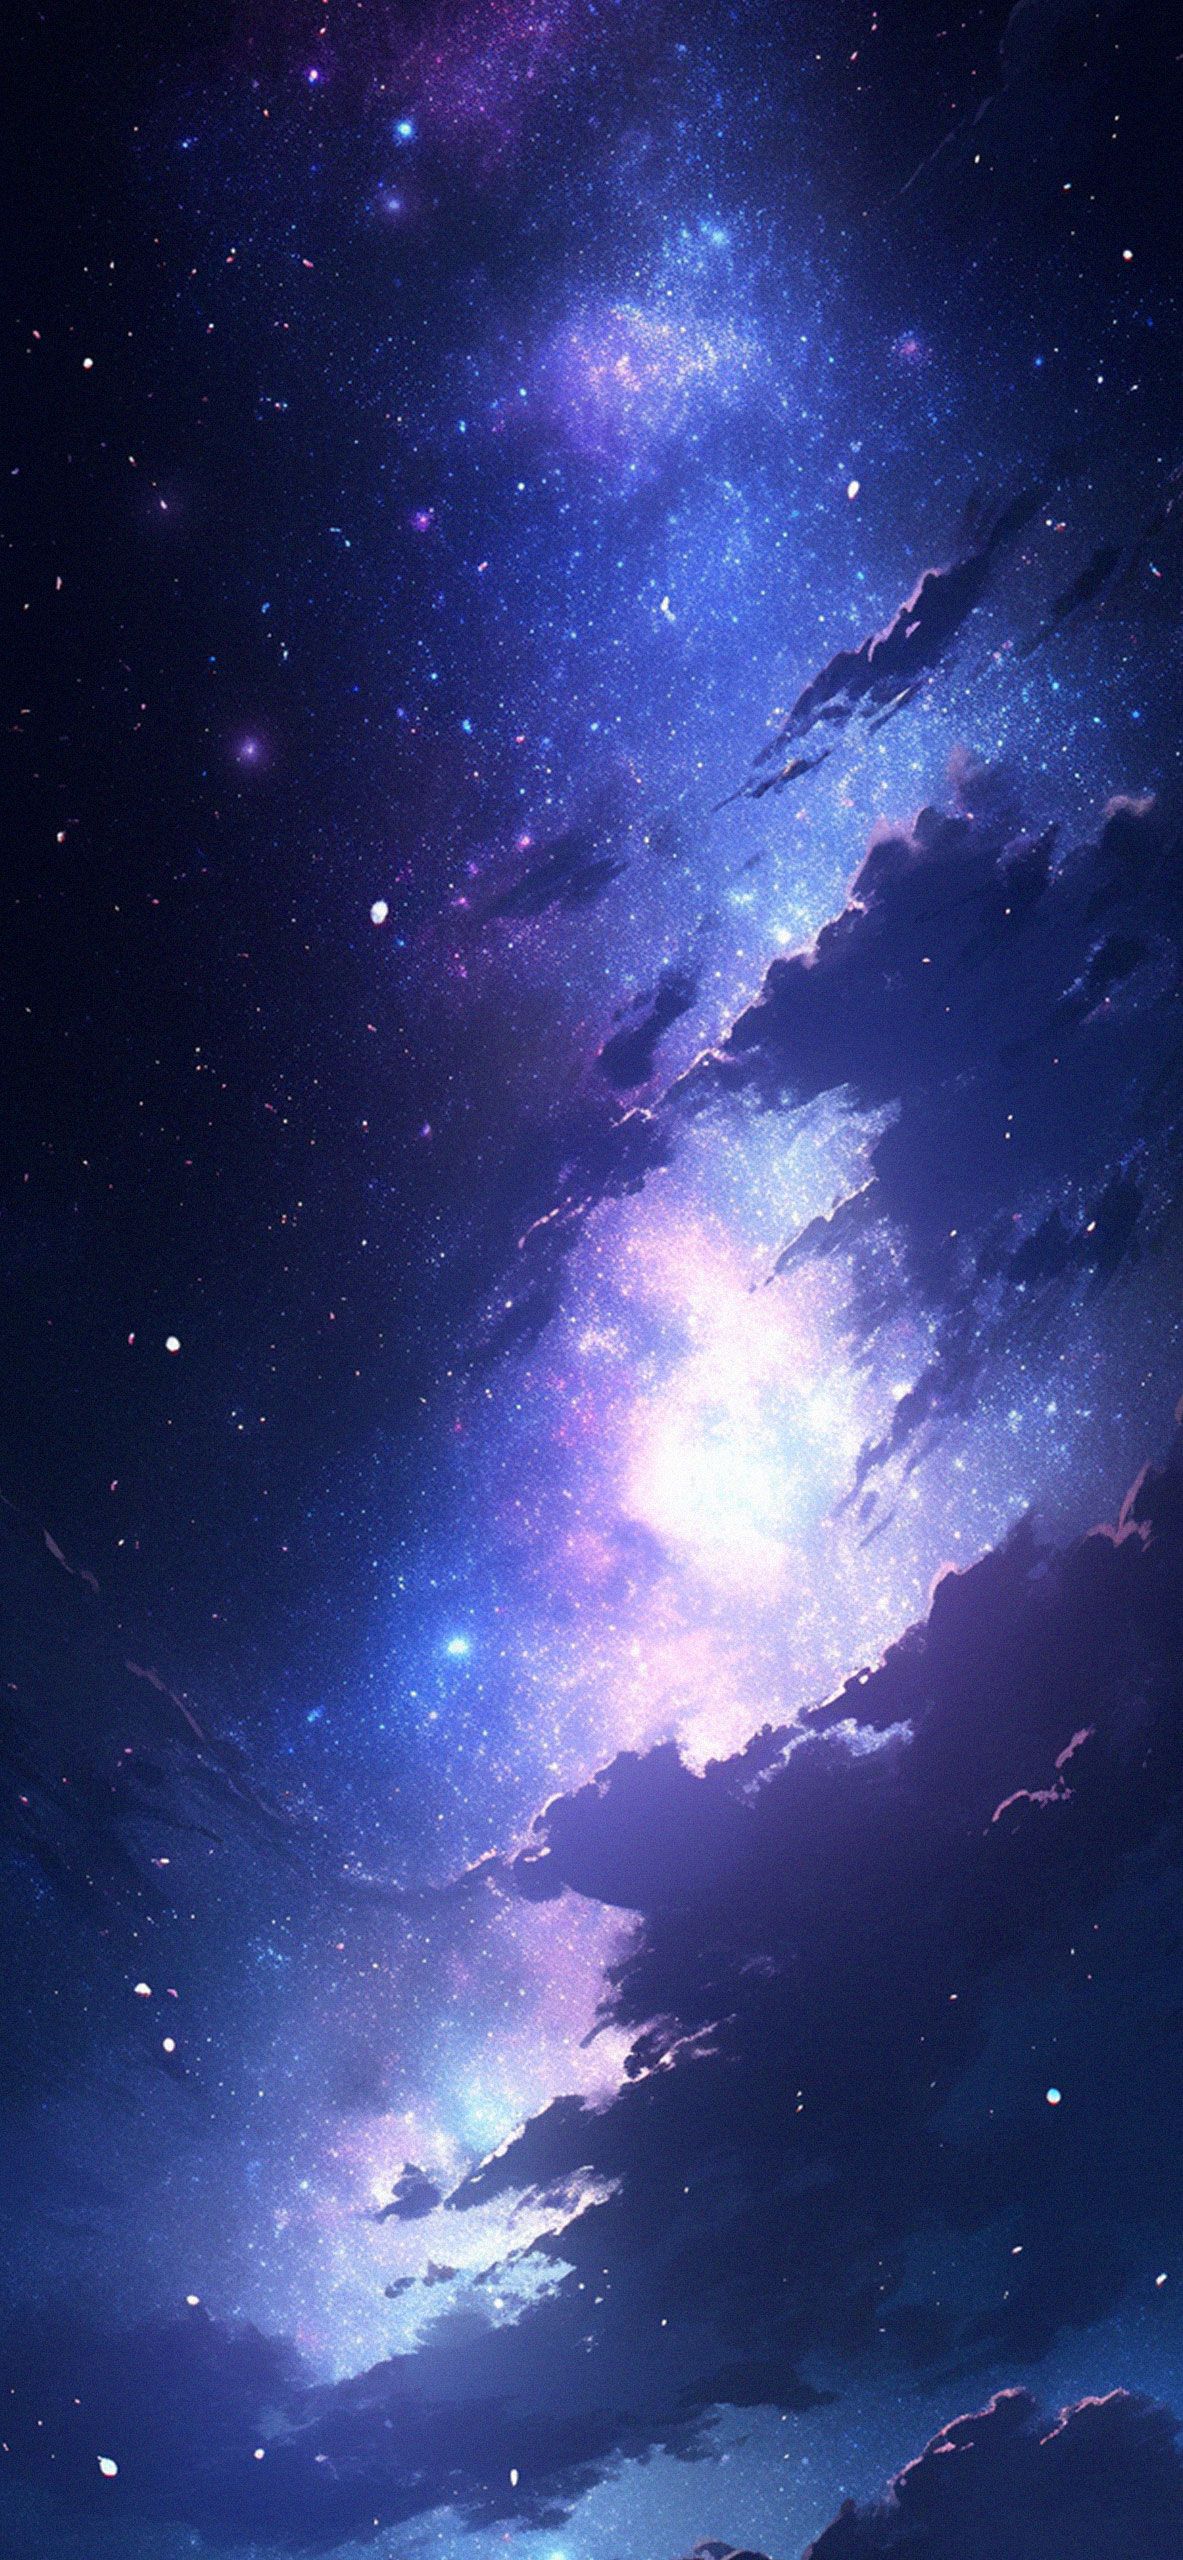 IPhone wallpaper of the day: galaxy - Android, galaxy